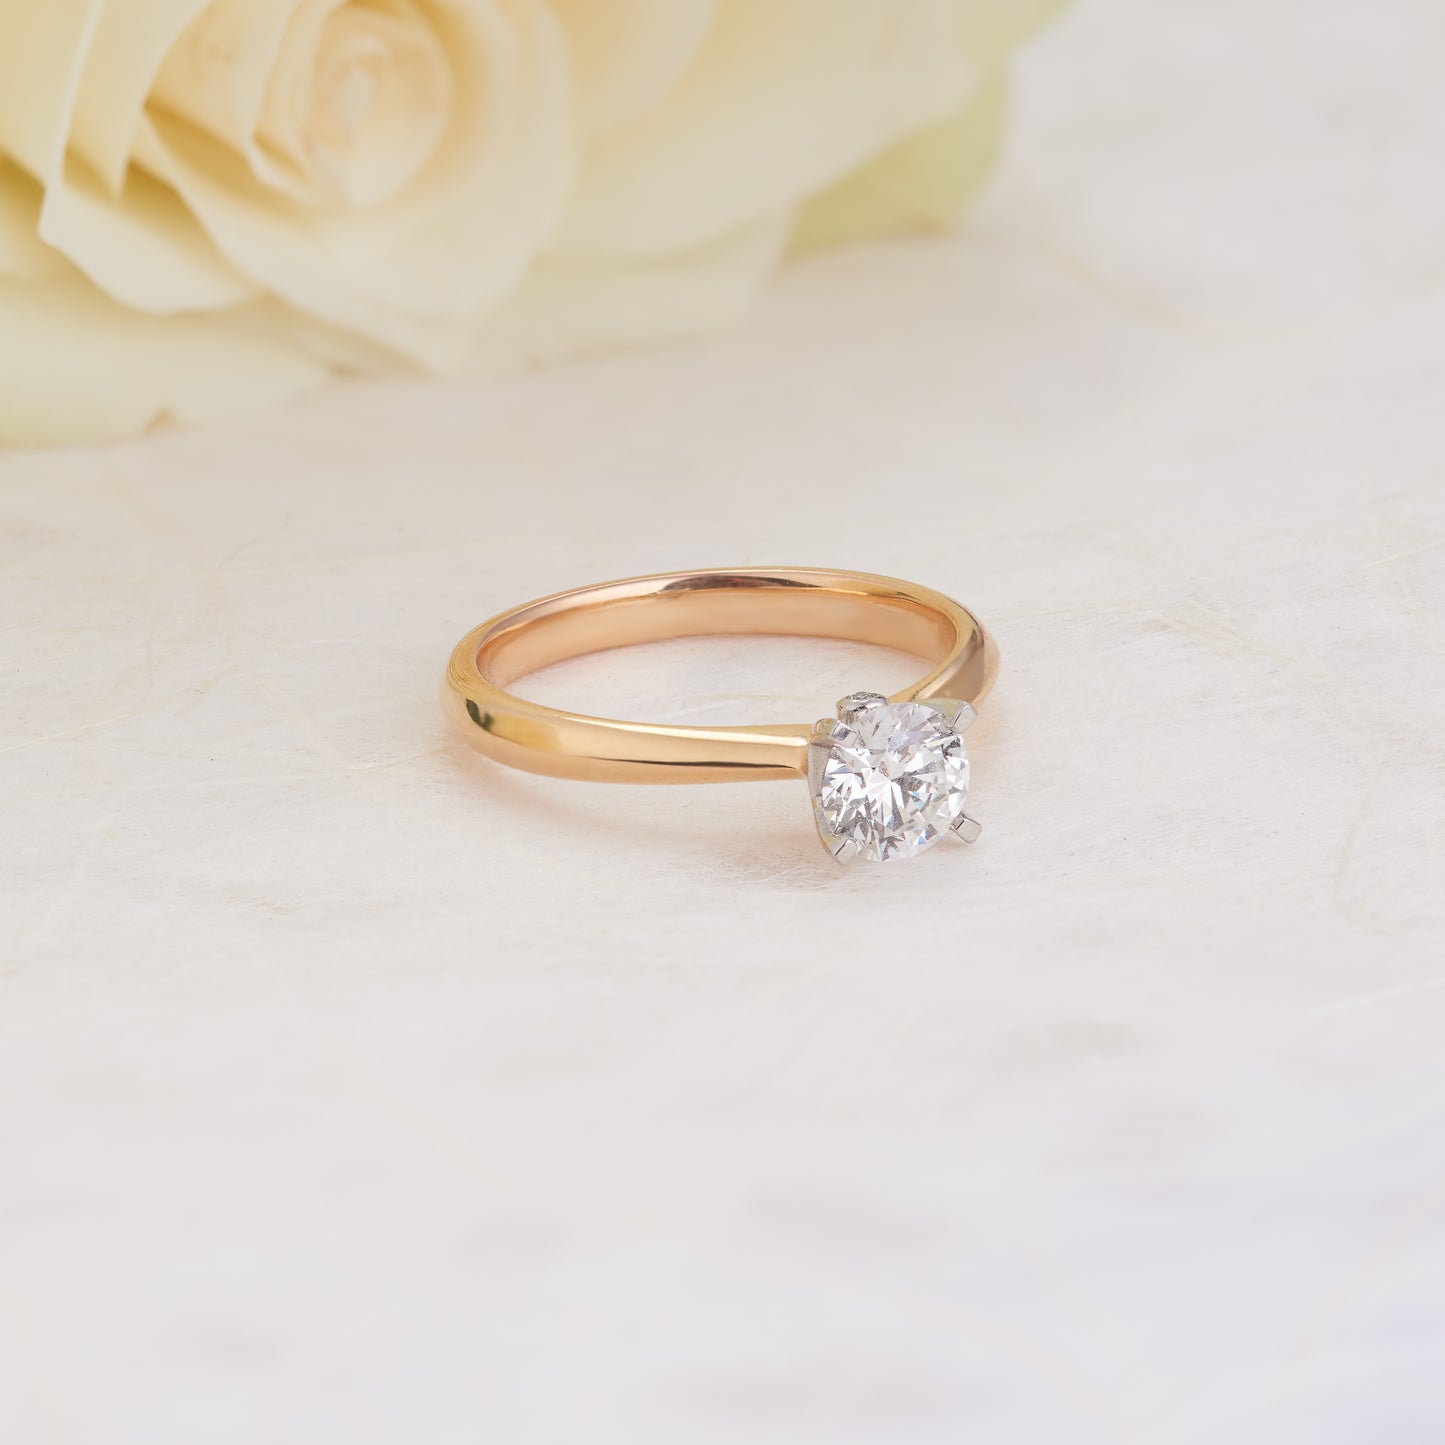 18K Rose Gold and Platinum GIA Certified Round Brilliant Diamond Solitaire Engagement Ring 0.75ct